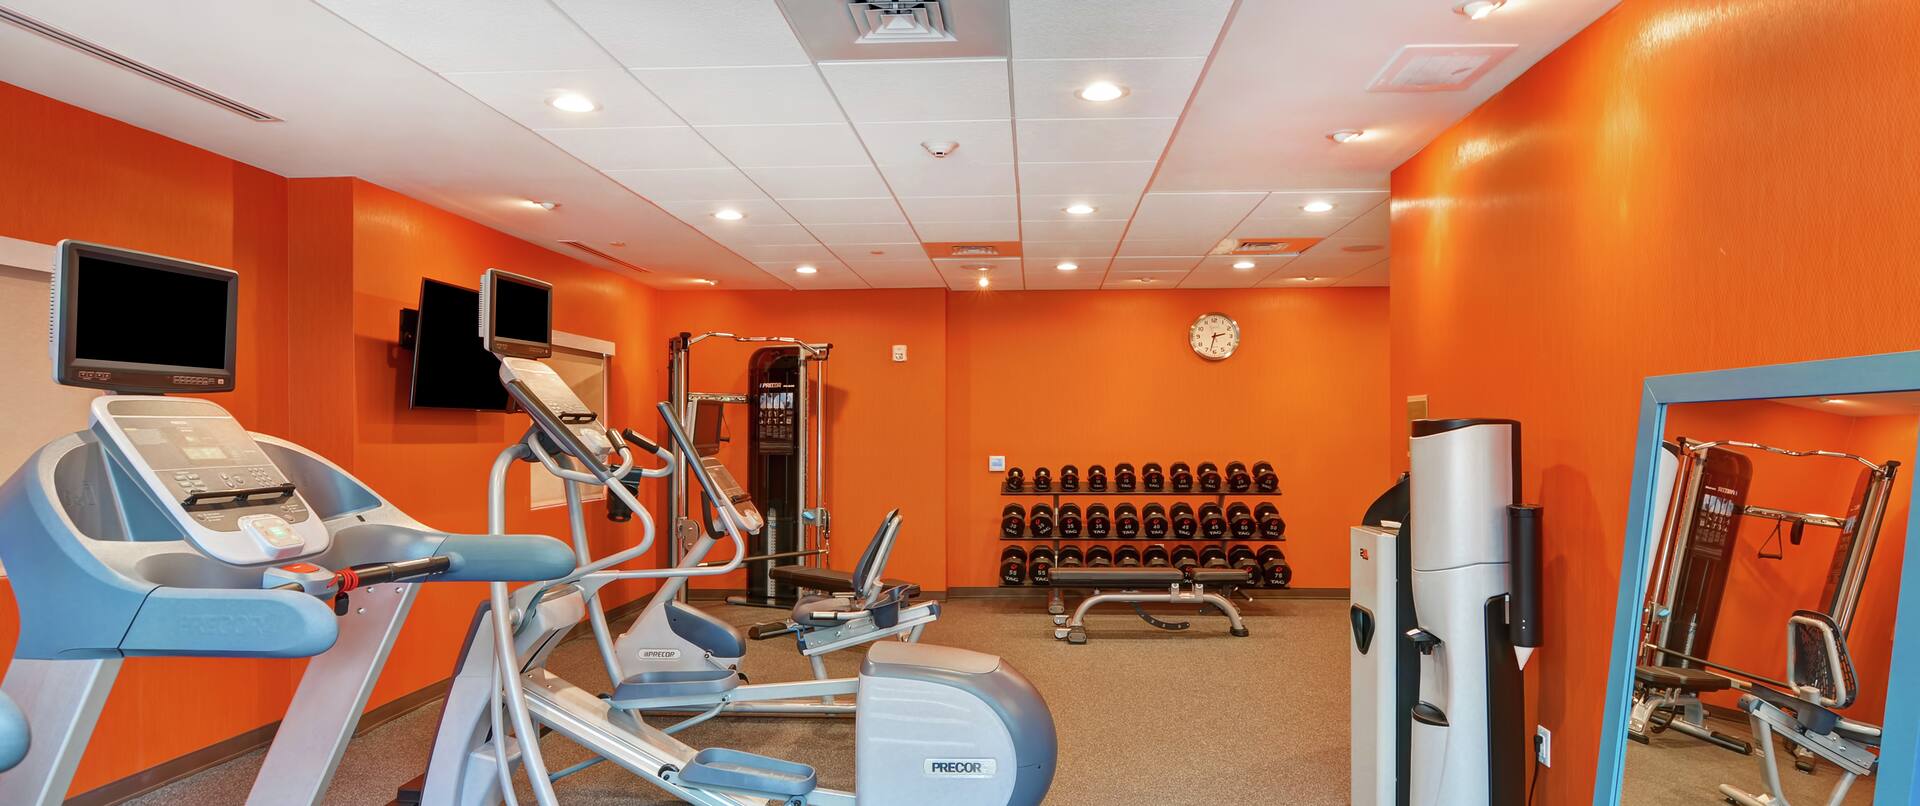 Spin2 Cycle Fitness Center with Elliptical Machine, Treadmill, and Free Weights